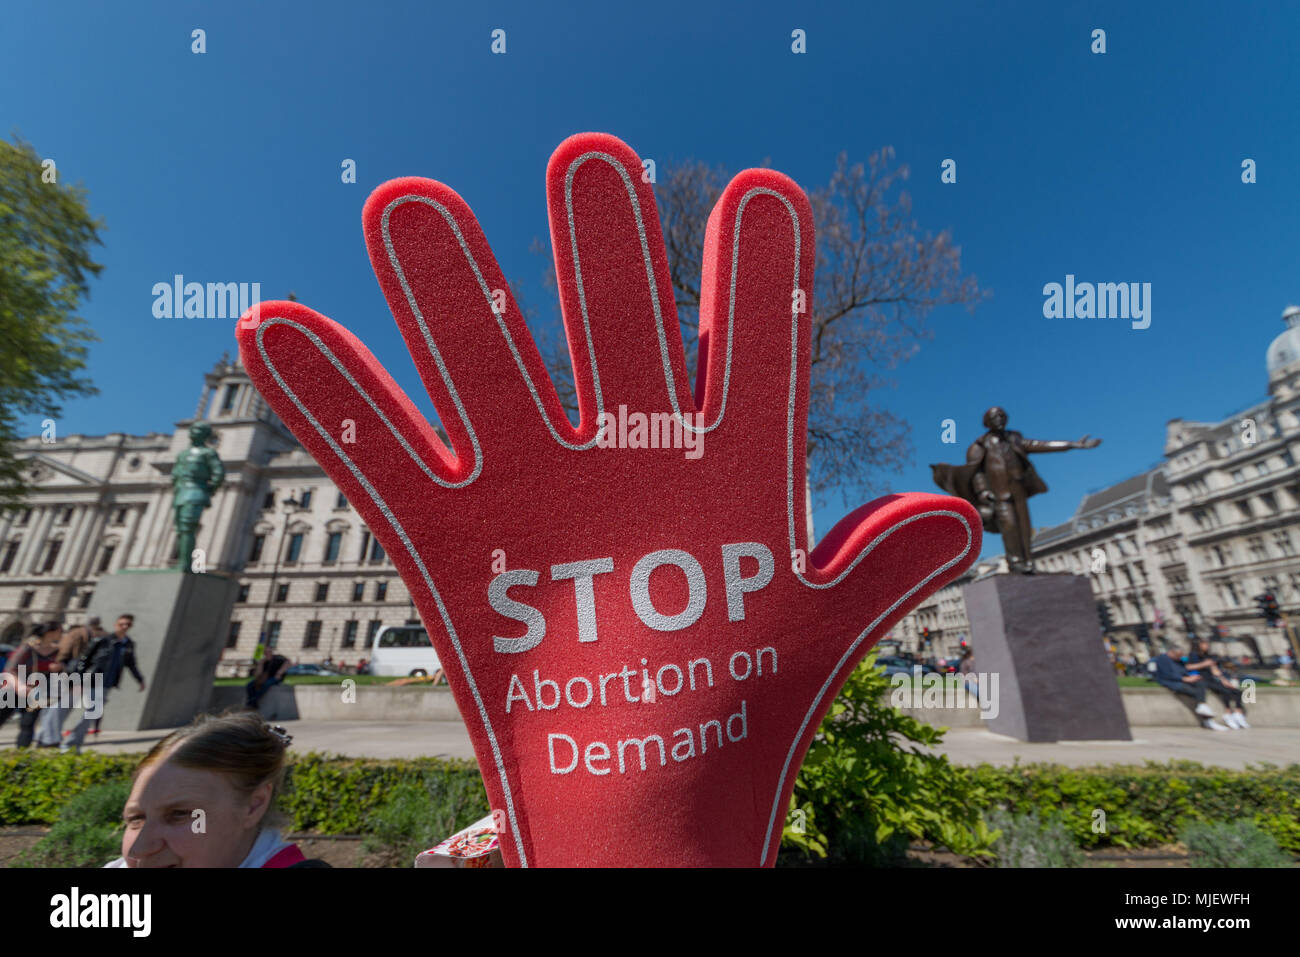 London, UK. 5th May, 2018. Hundreds of people joined March for Life today as counter protest against pro-abortion demo. The marches come just weeks ahead of a referendum in Ireland on the eighth amendment. Credit: Velar Grant/ZUMA Wire/Alamy Live News Stock Photo